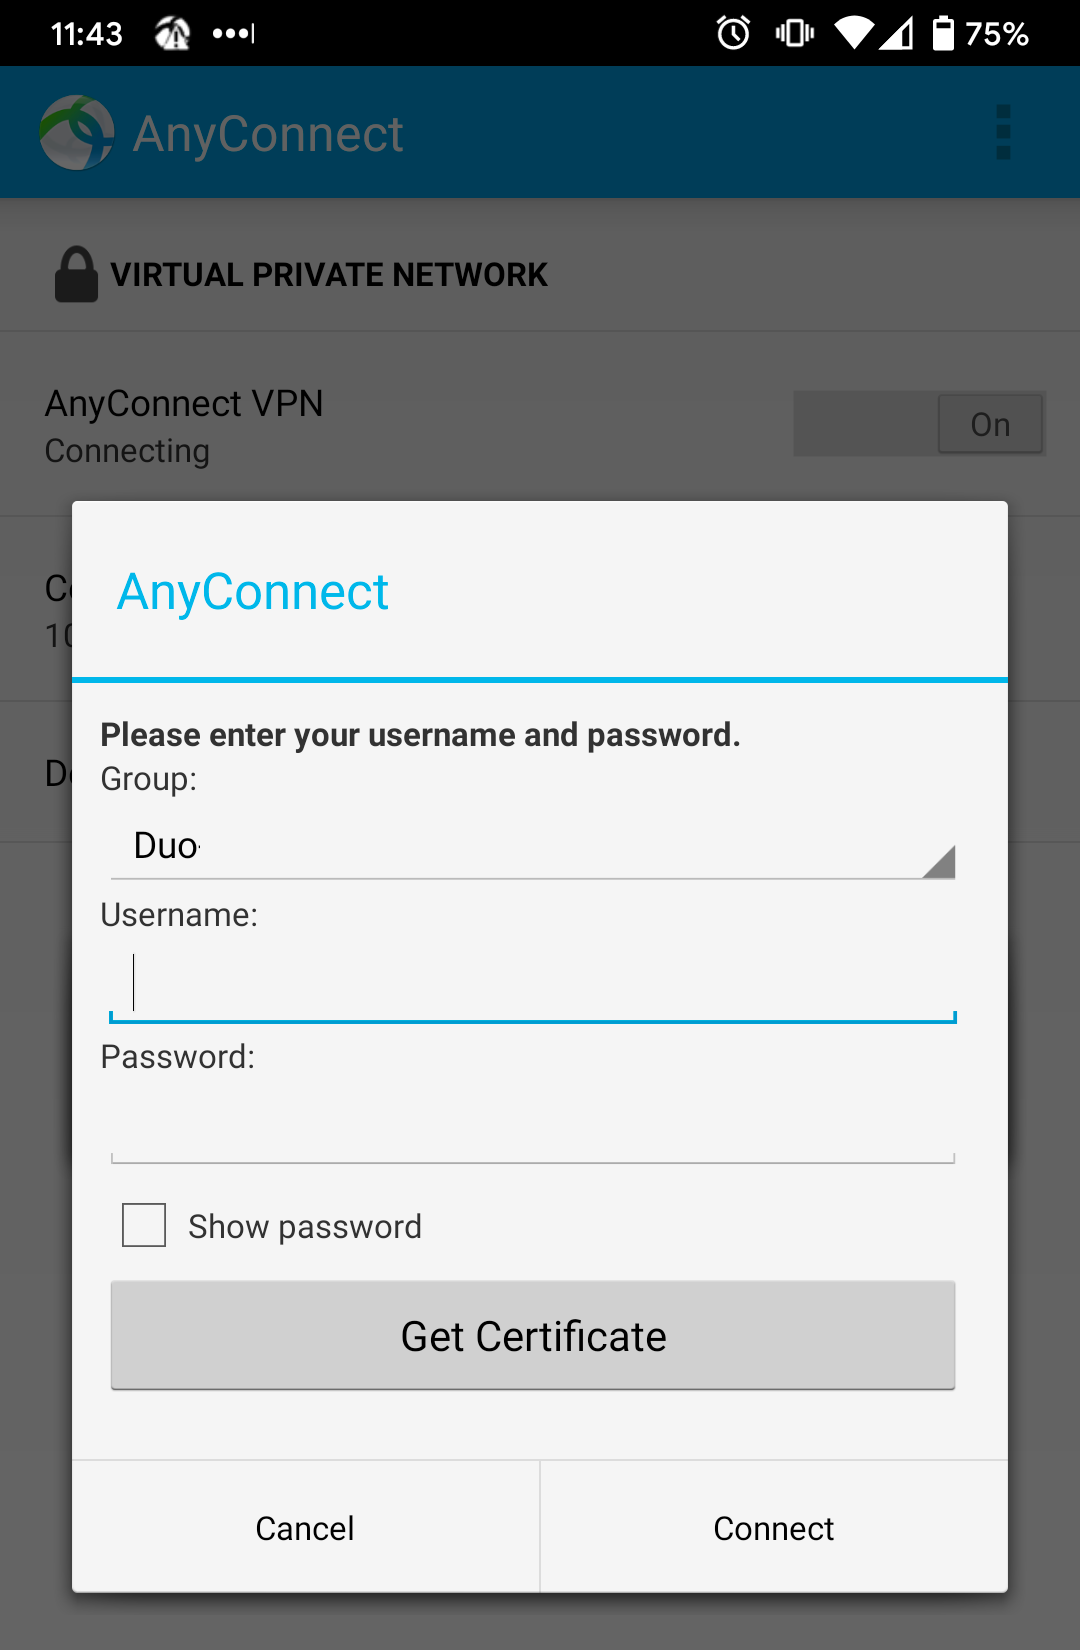 AnyConnect Mobile Client with Single Password